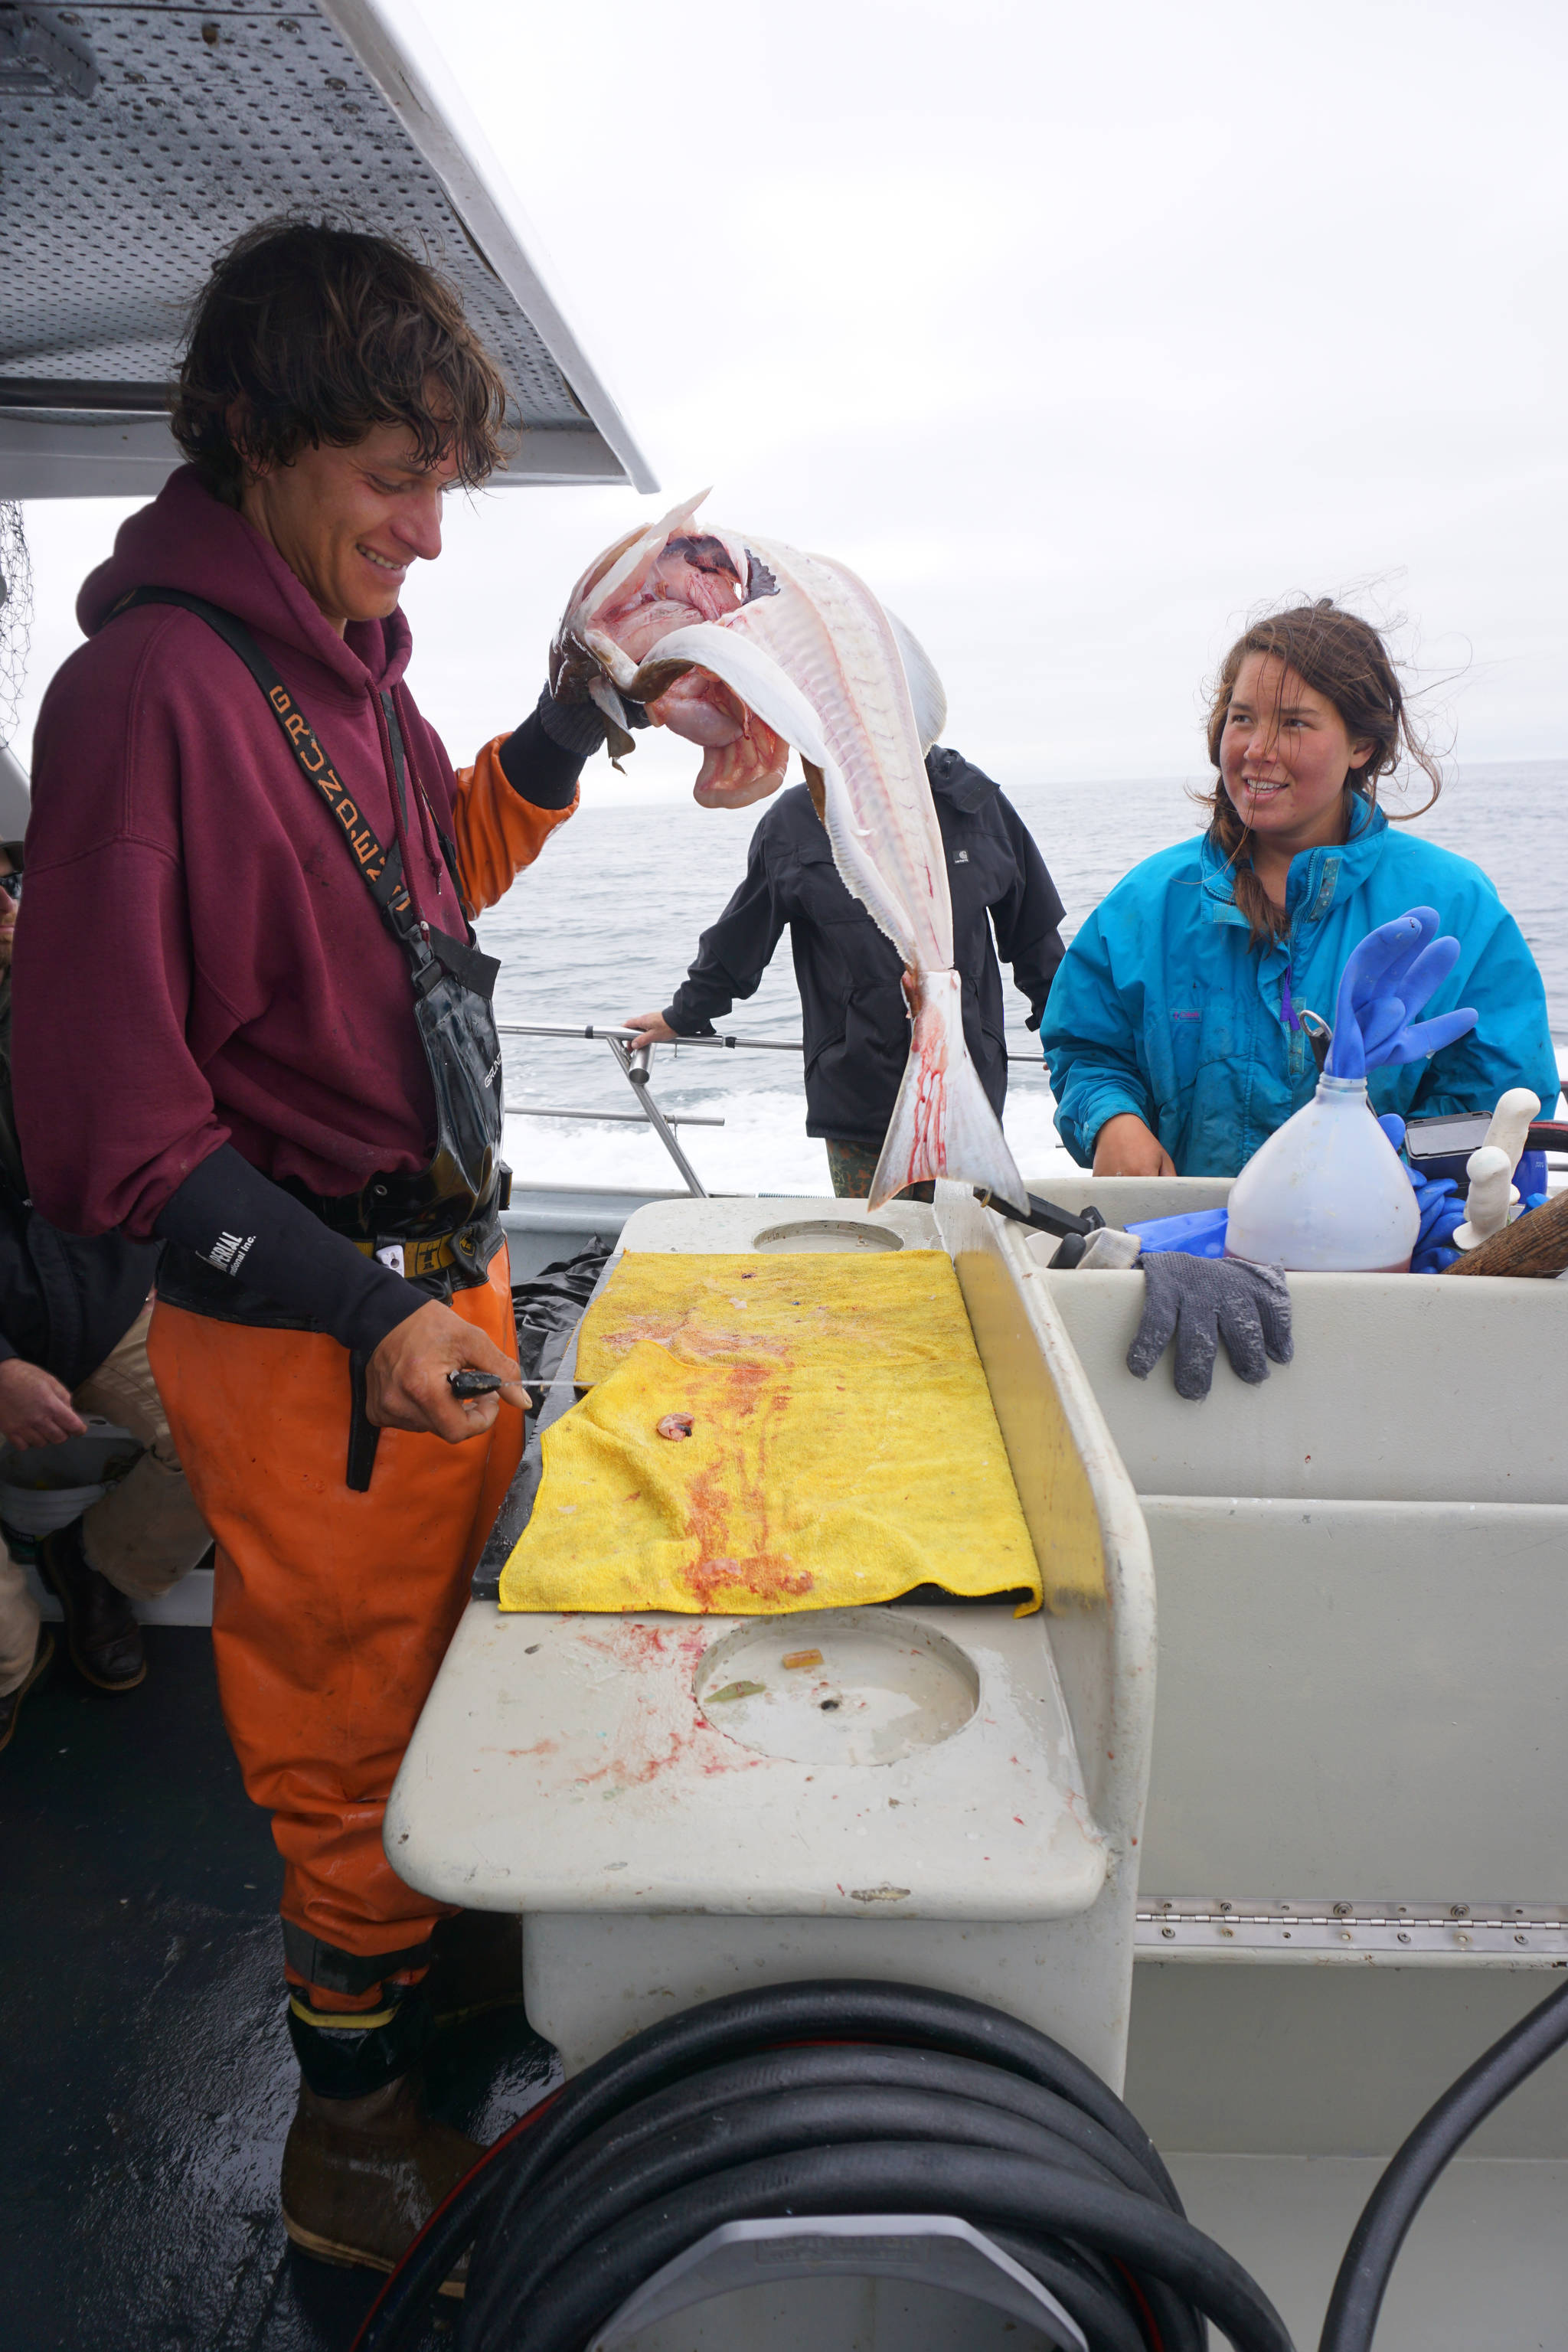 Casey McKinnon fillets a halibut as the Irish returns to Homer, Alaska from a halibut fishing trip in Cook Inlet near Mount Iliamna on July 16, 2017. Fellow deckhand Chelsea Schmidt watches. According to federal regulations, halibut can be fileted on board into four bottom and top pieces as long as the skin is retained and the carcass for a size-restricted fish is kept. Photo by Michael Armstrong/Homer News